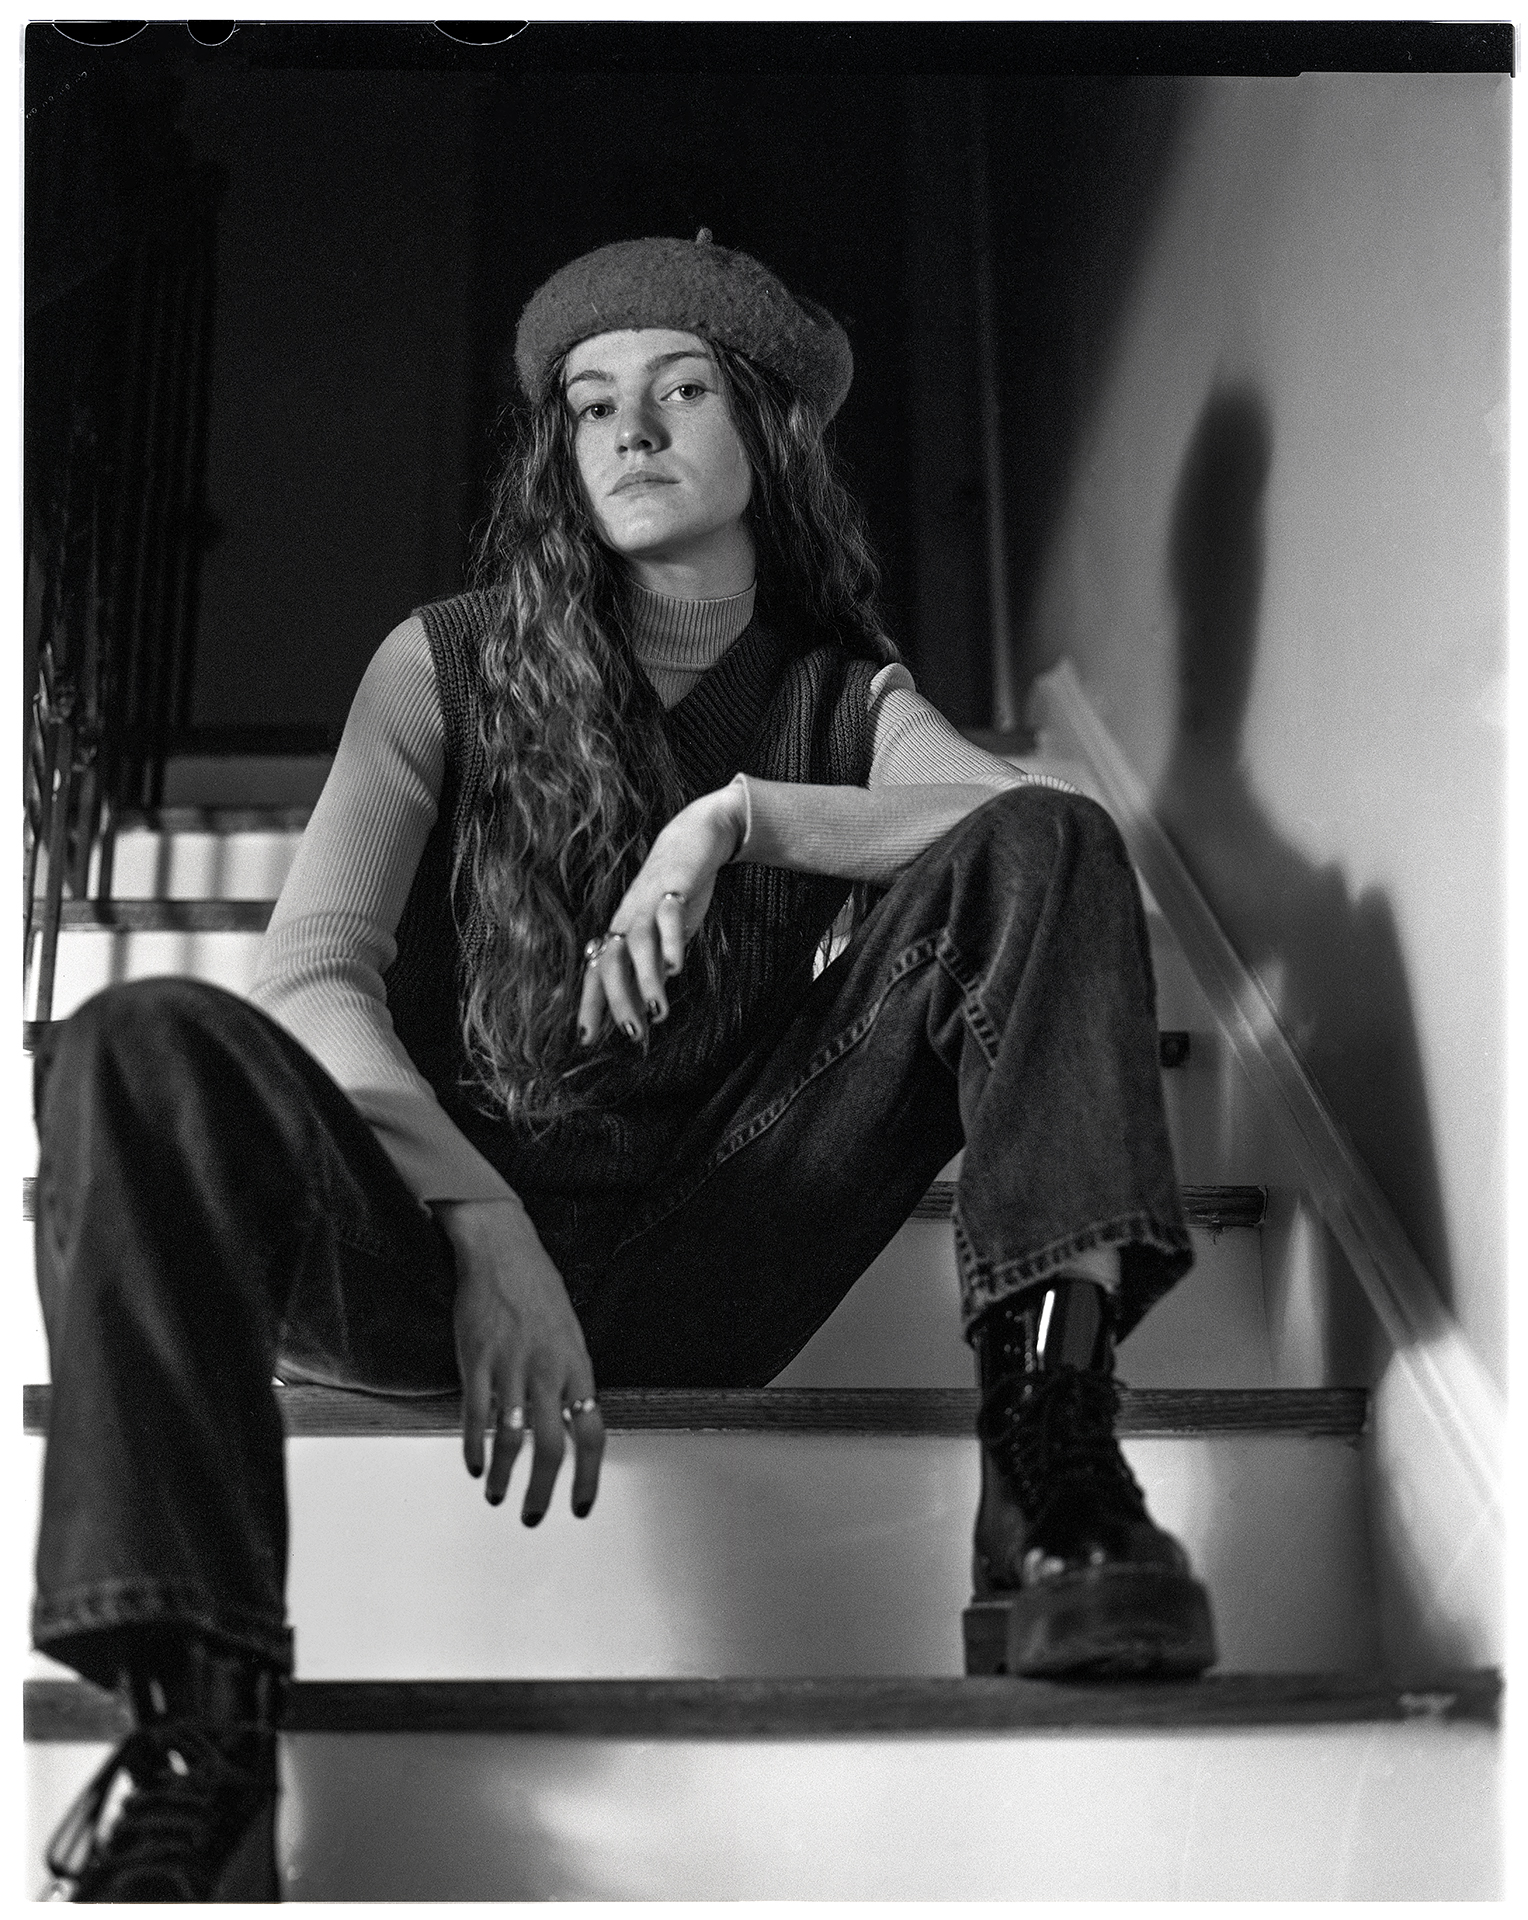 A black and white image shot on film depicting Sam, a person in their early 20’s with long wavy hair. Sam is sitting on a staircase. They are leaning forward slightly above the camera with one leg positioned higher than the other. Their arms are resting on each leg. Sam is looking directly into the camera. They are wearing Doc Martin boots and a beret hat with a dark sweater vest and a light long-sleeve shirt underneath.